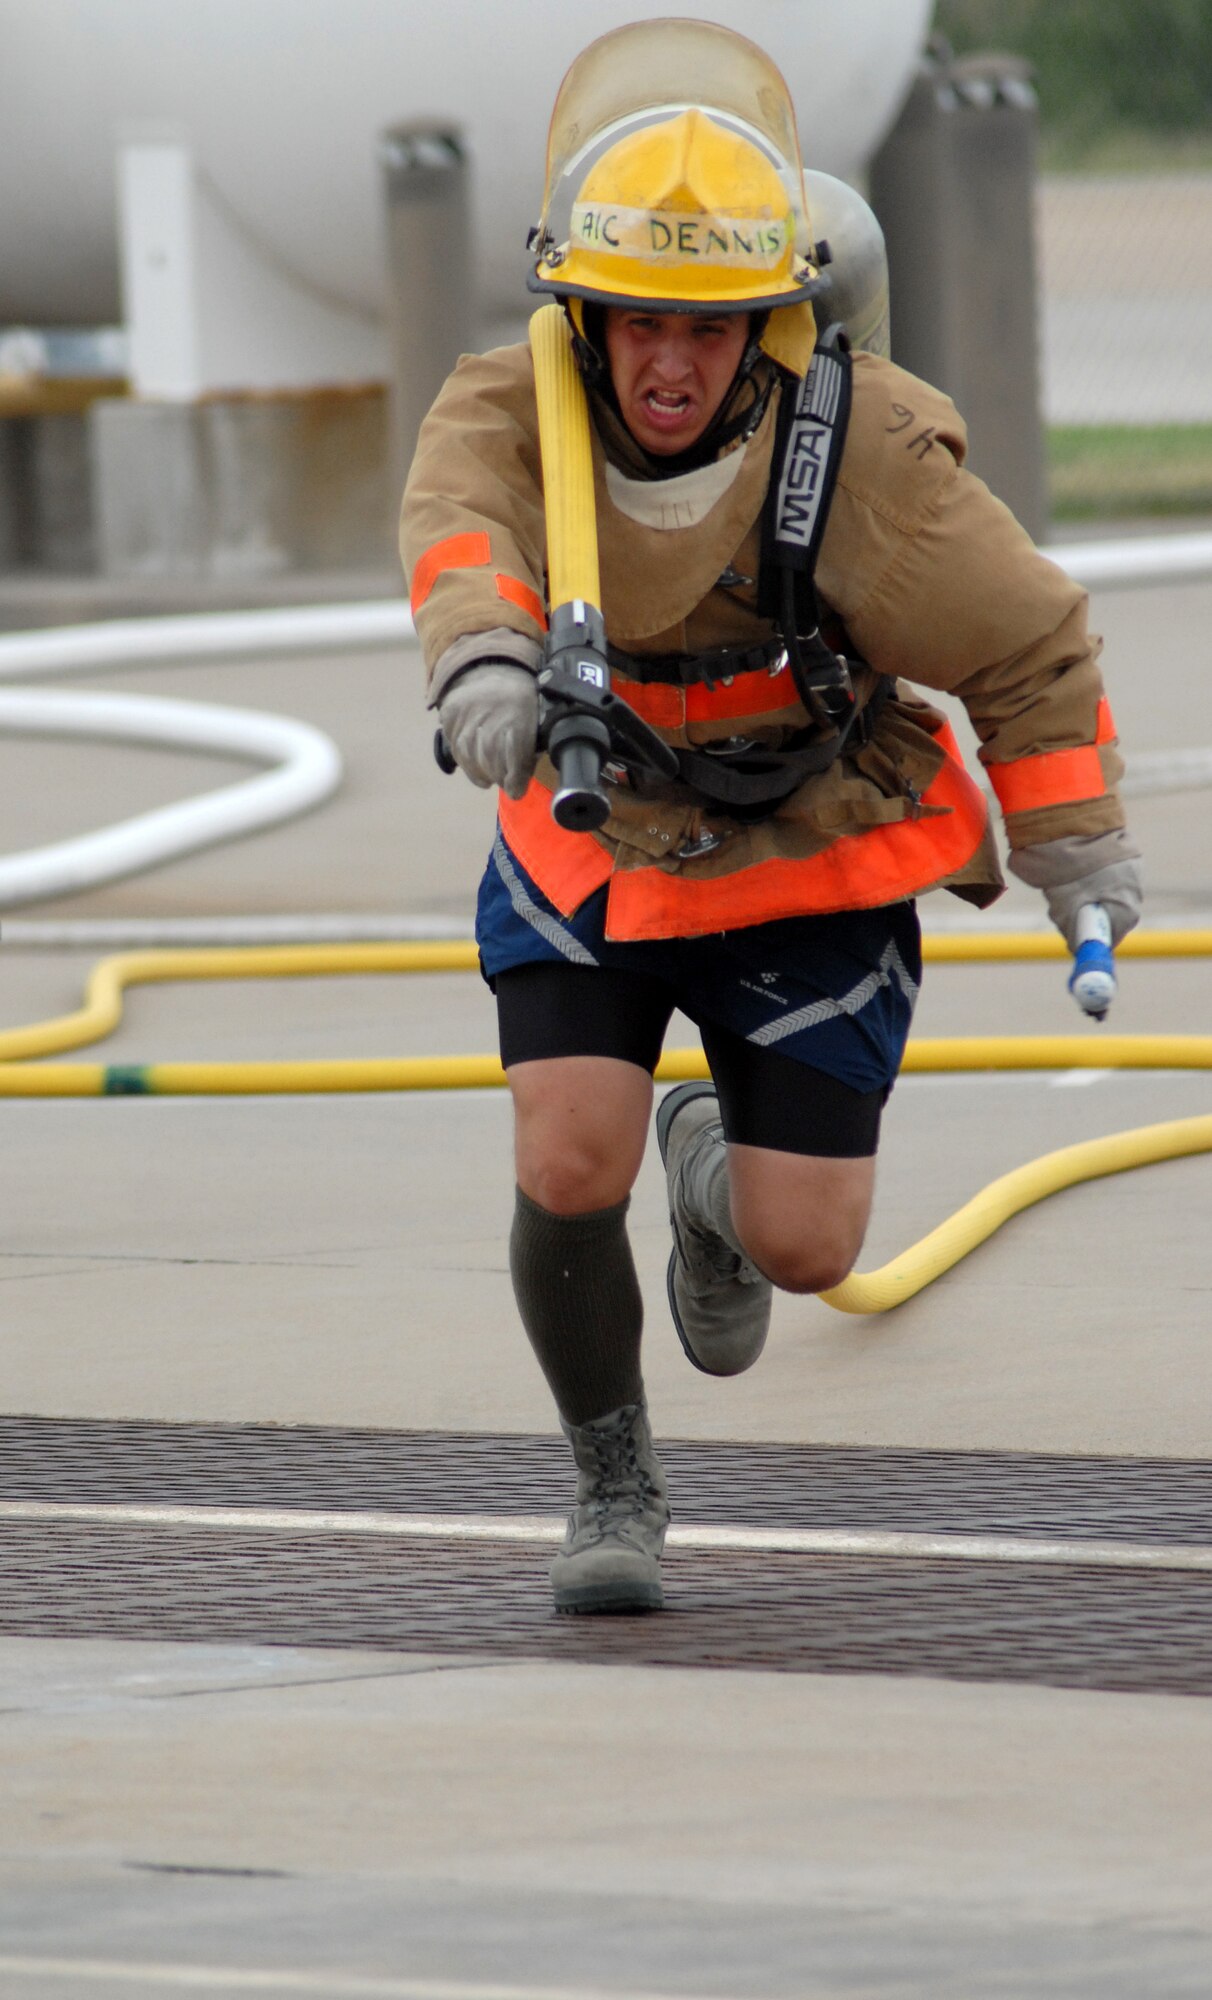 Rookie Firefighter Challenge pushes physical limits > Goodfellow